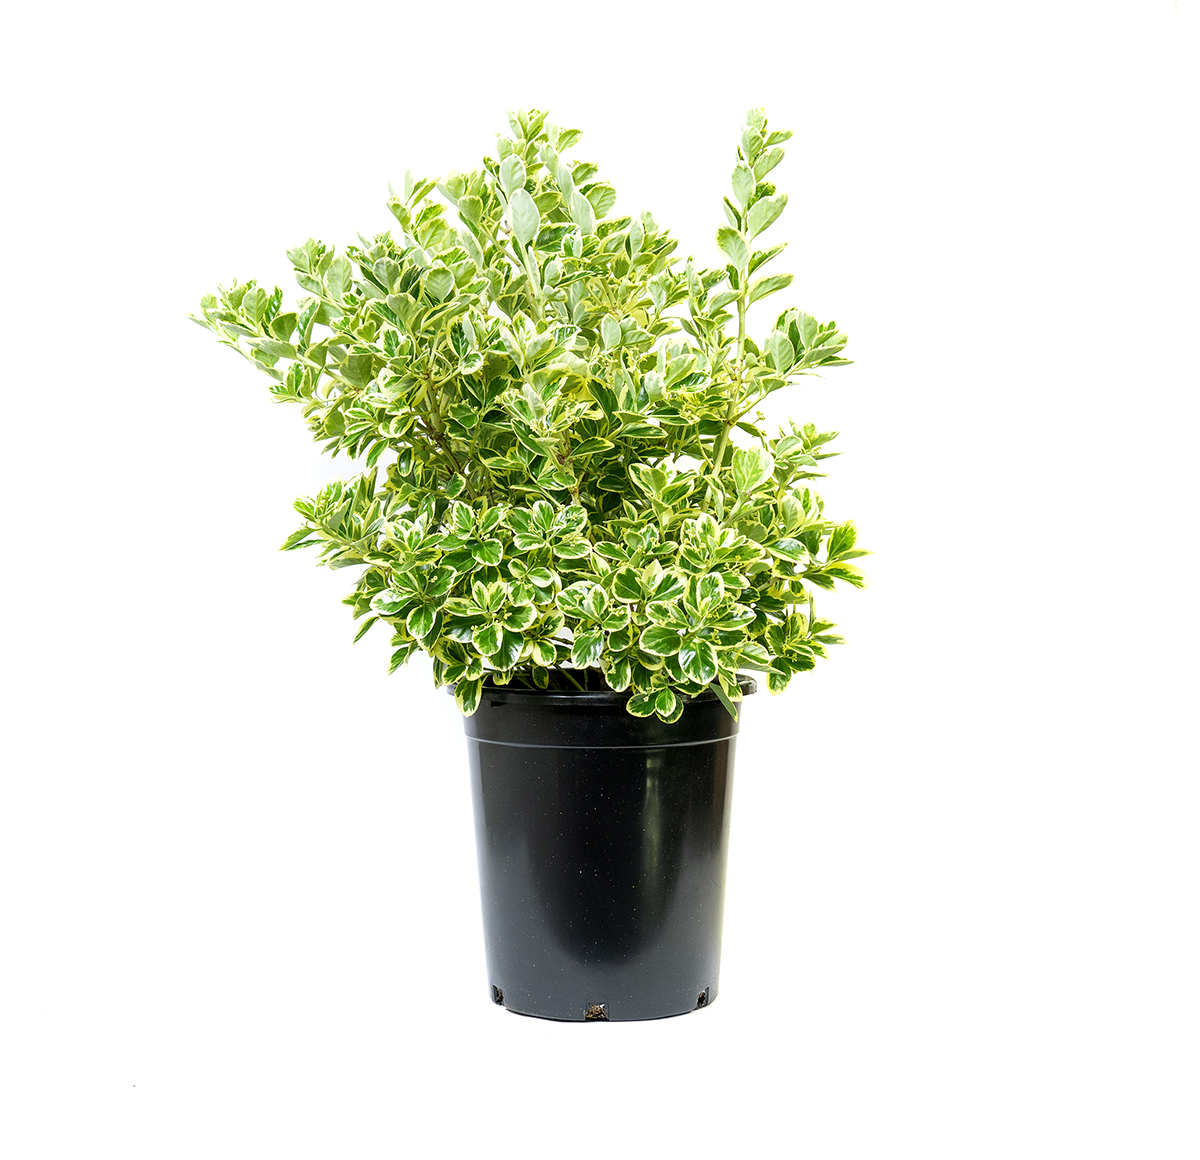 single potted euonymus silver queen has glossy green leaves with cream to silver margins and won't fade in the sun